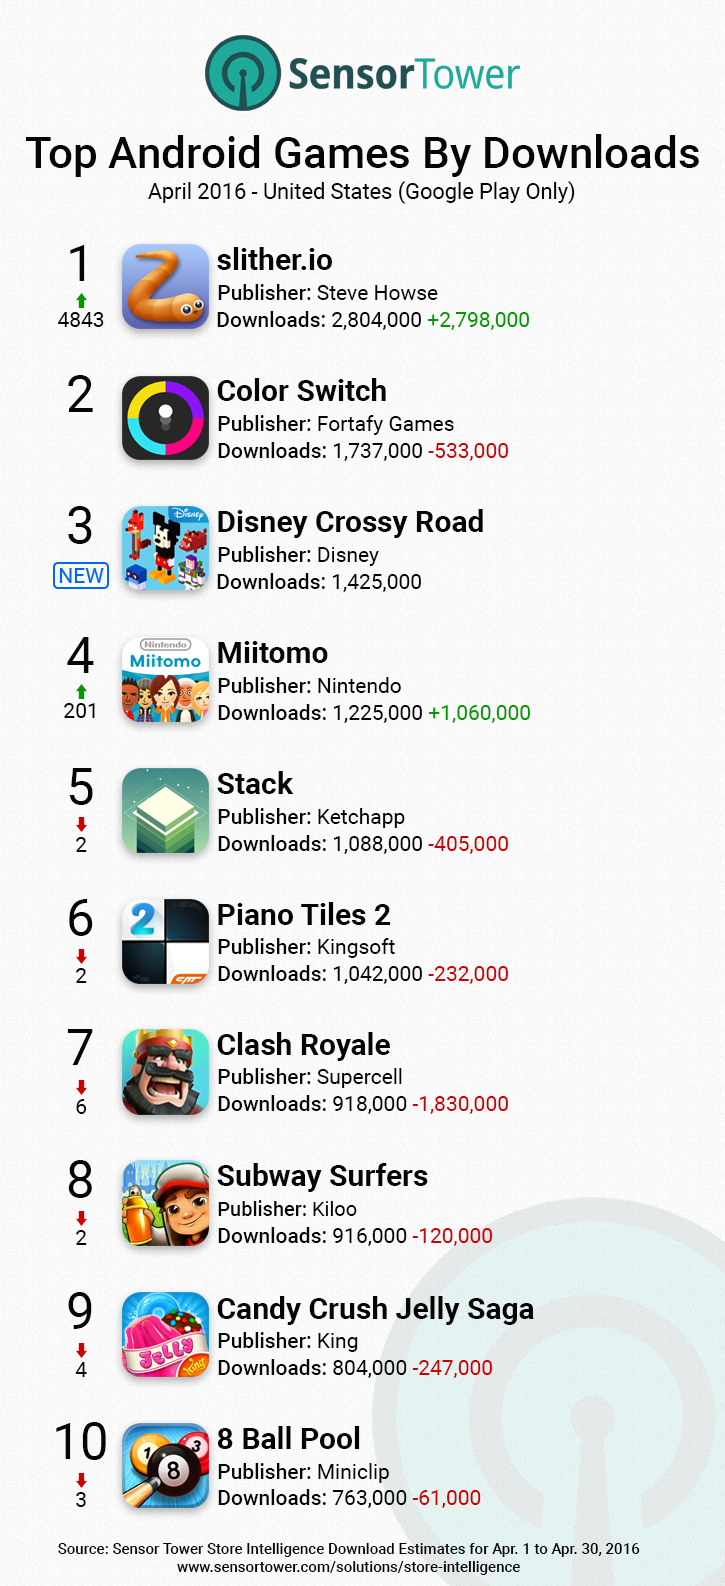 Google Play Games Top Downloads United States April 2016